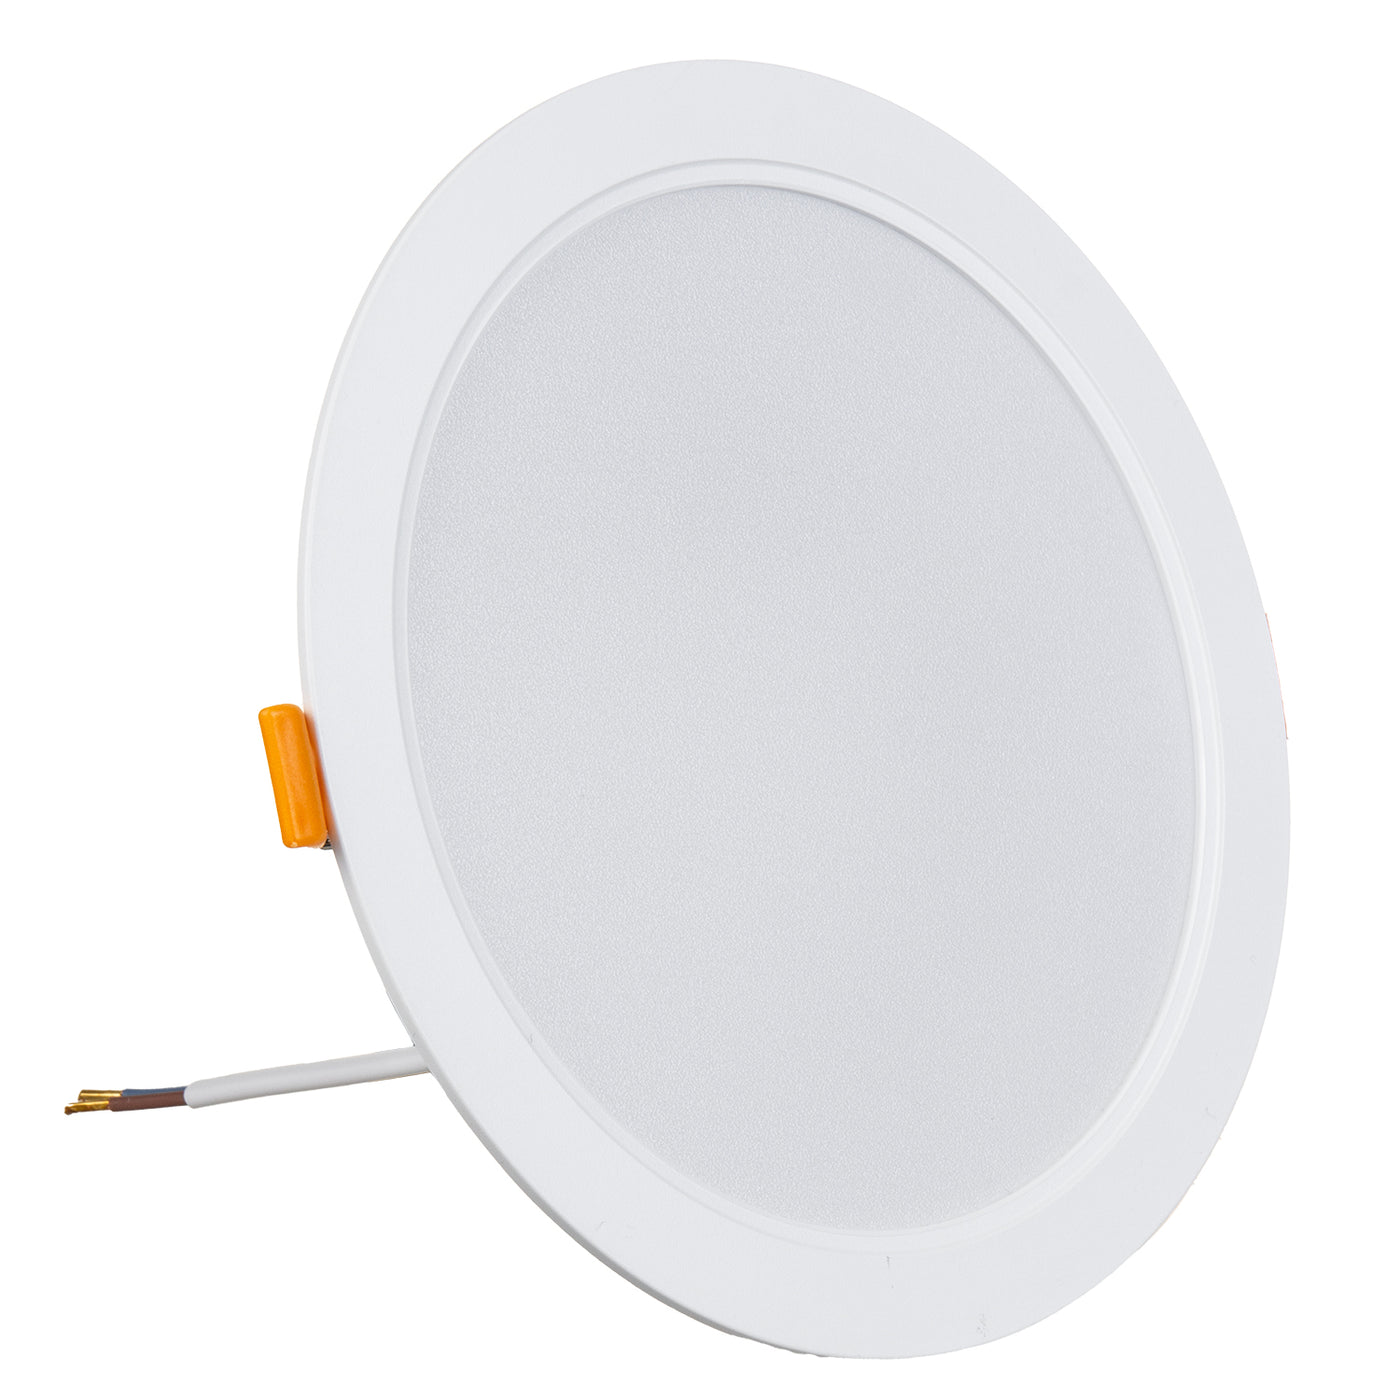 5x panel LED sufitowy Maclean, podtynkowy SLIM, 18W, Neutral White 4000K, 170*26mm, 1800 lm, MCE372 R + adapter natynkowy MCE377 R